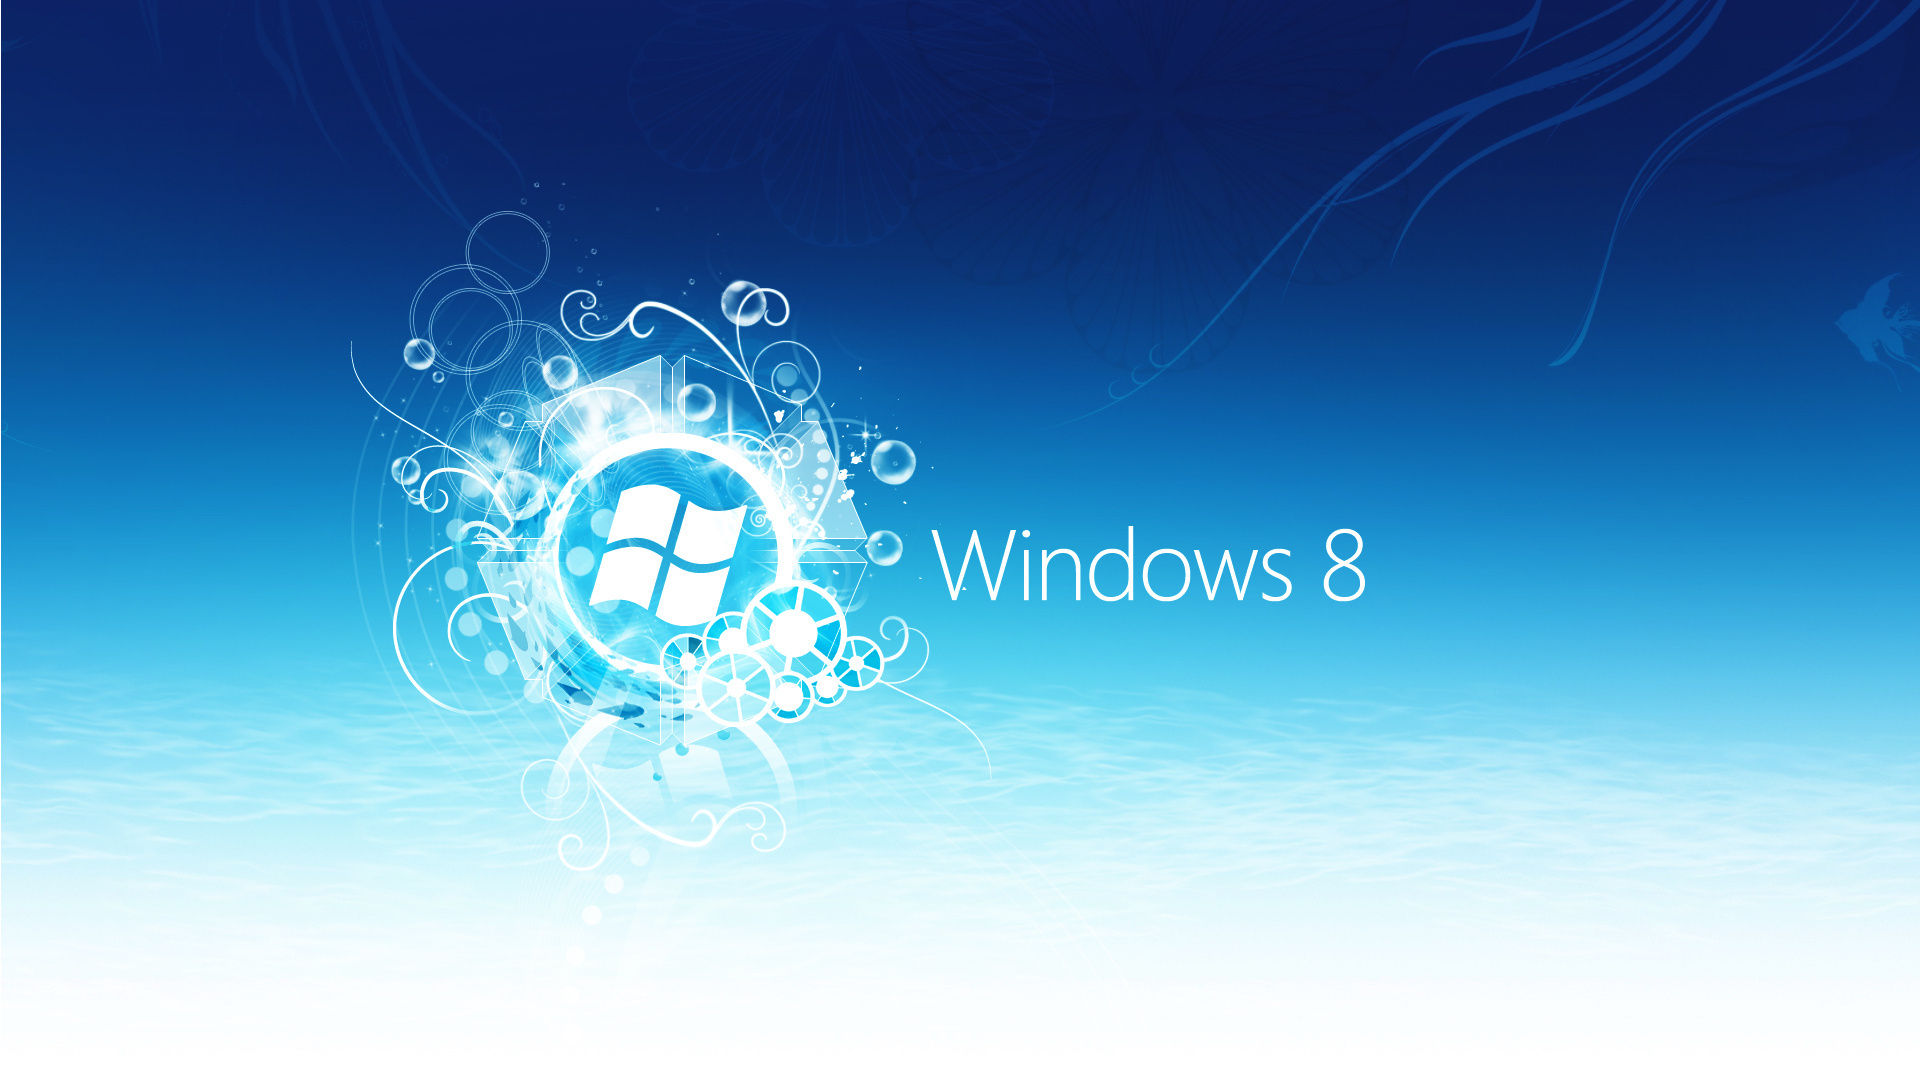 Windows 8 Wallpapers Themes Group (66+)